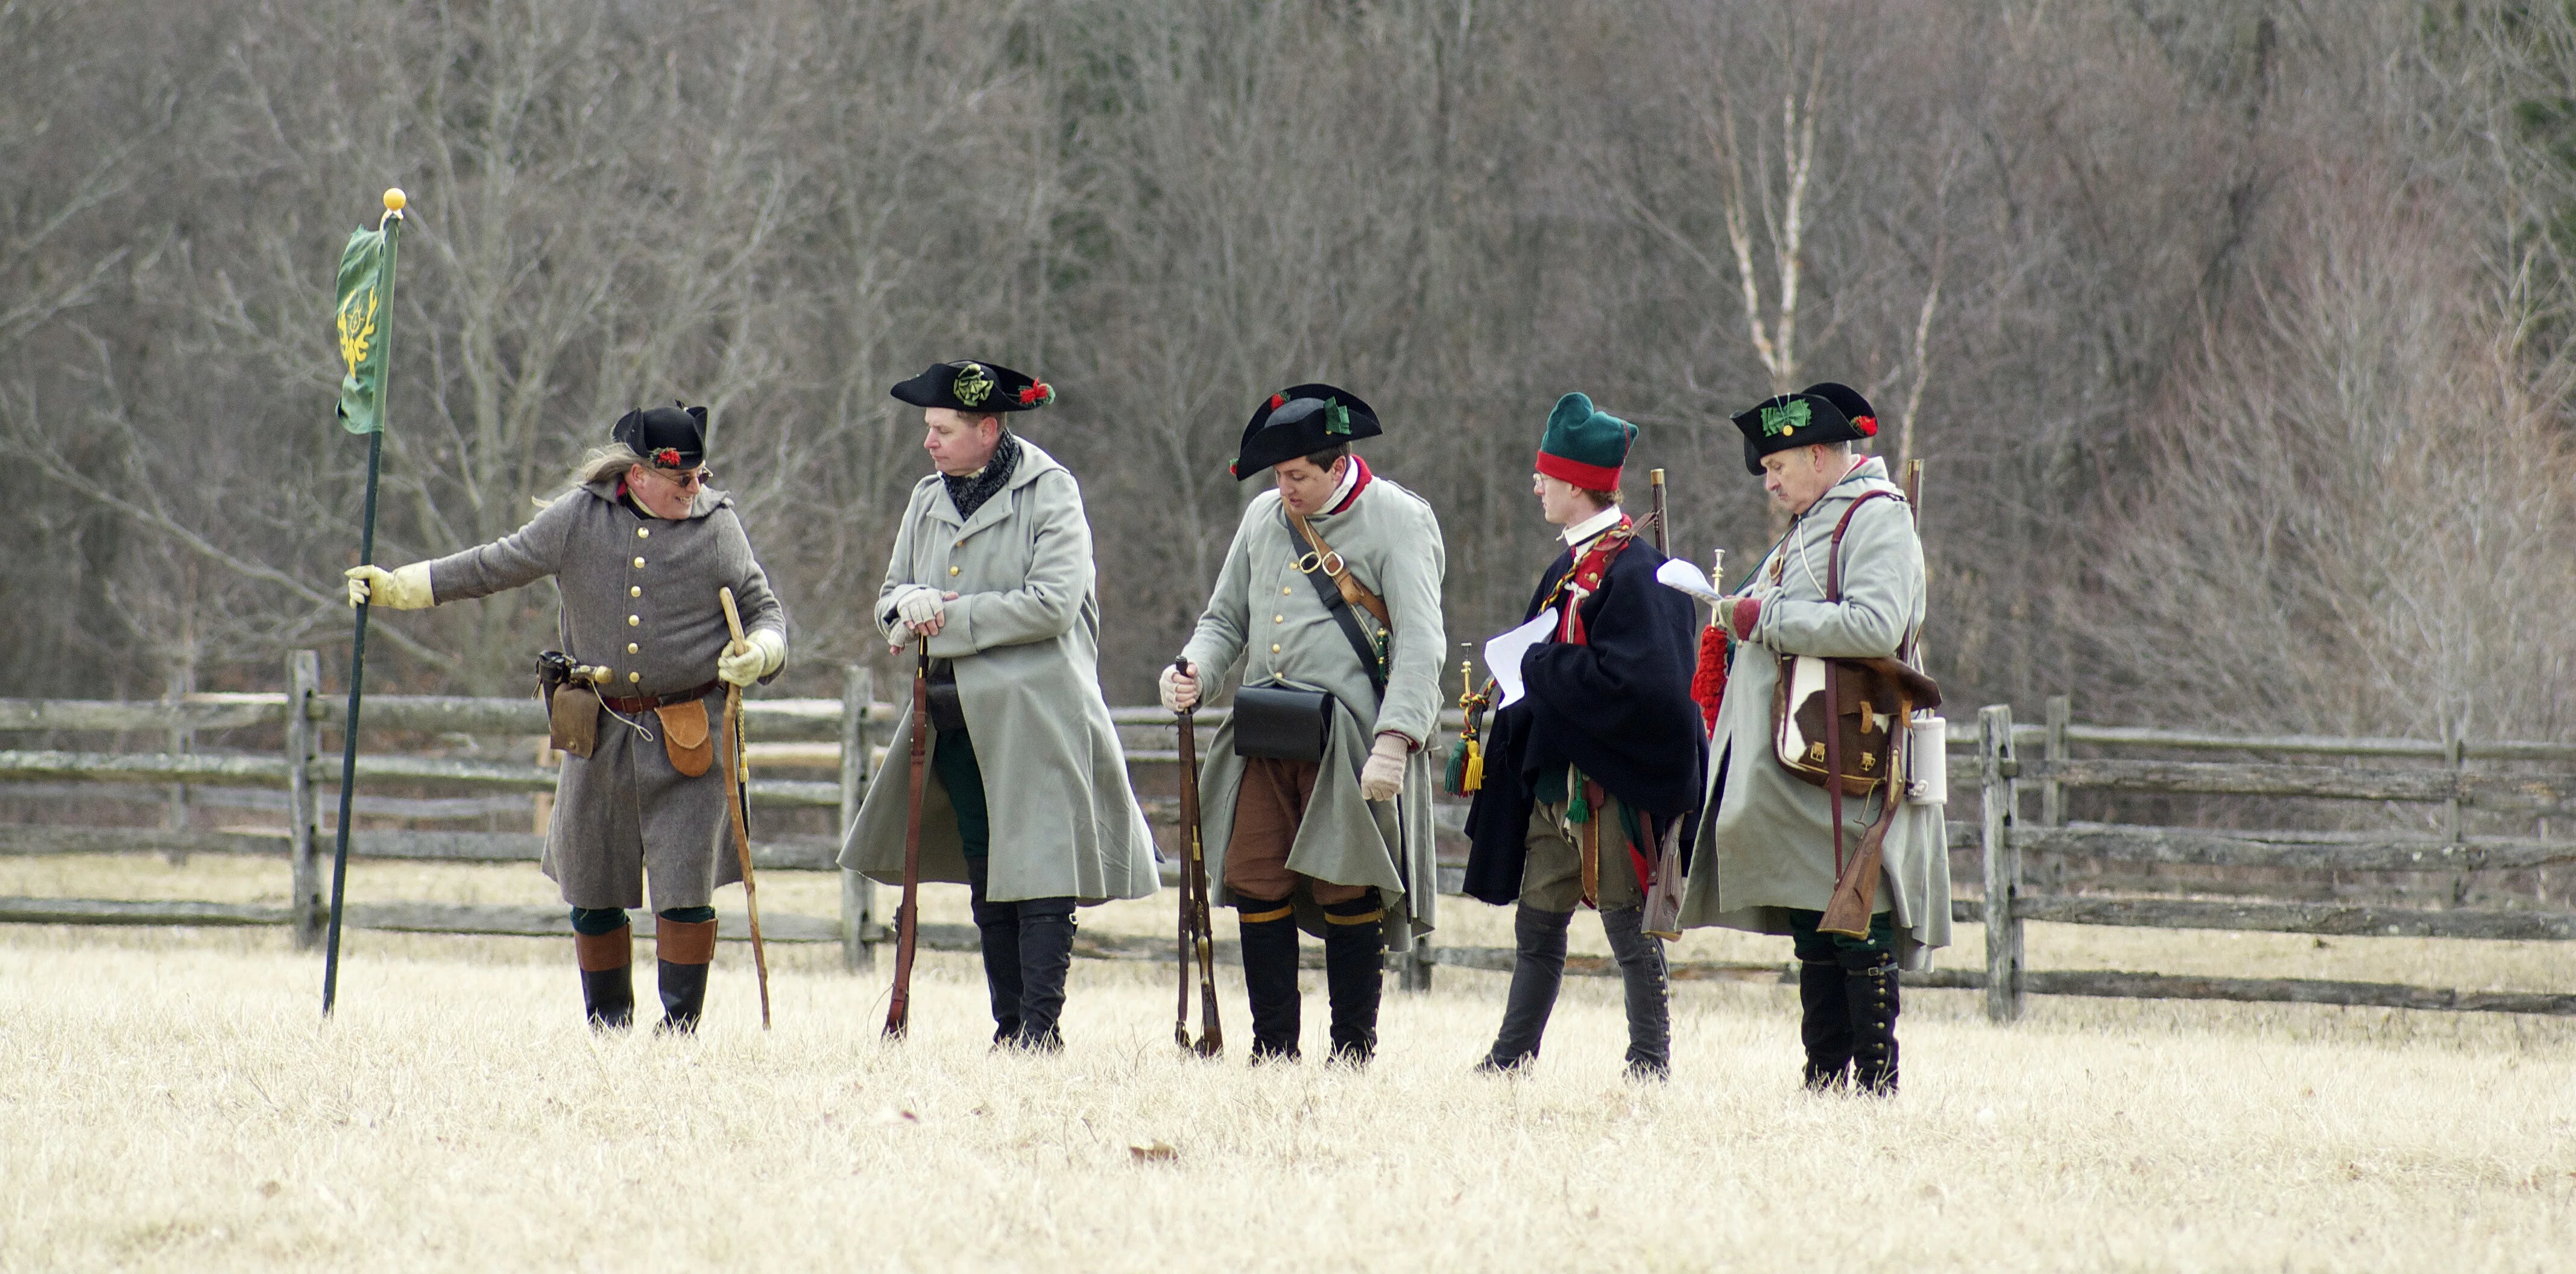 The Jaeger Corps practices drill at the School of the Soldier 2015 at Peter Wentz Farmstead in Landsdale, PA